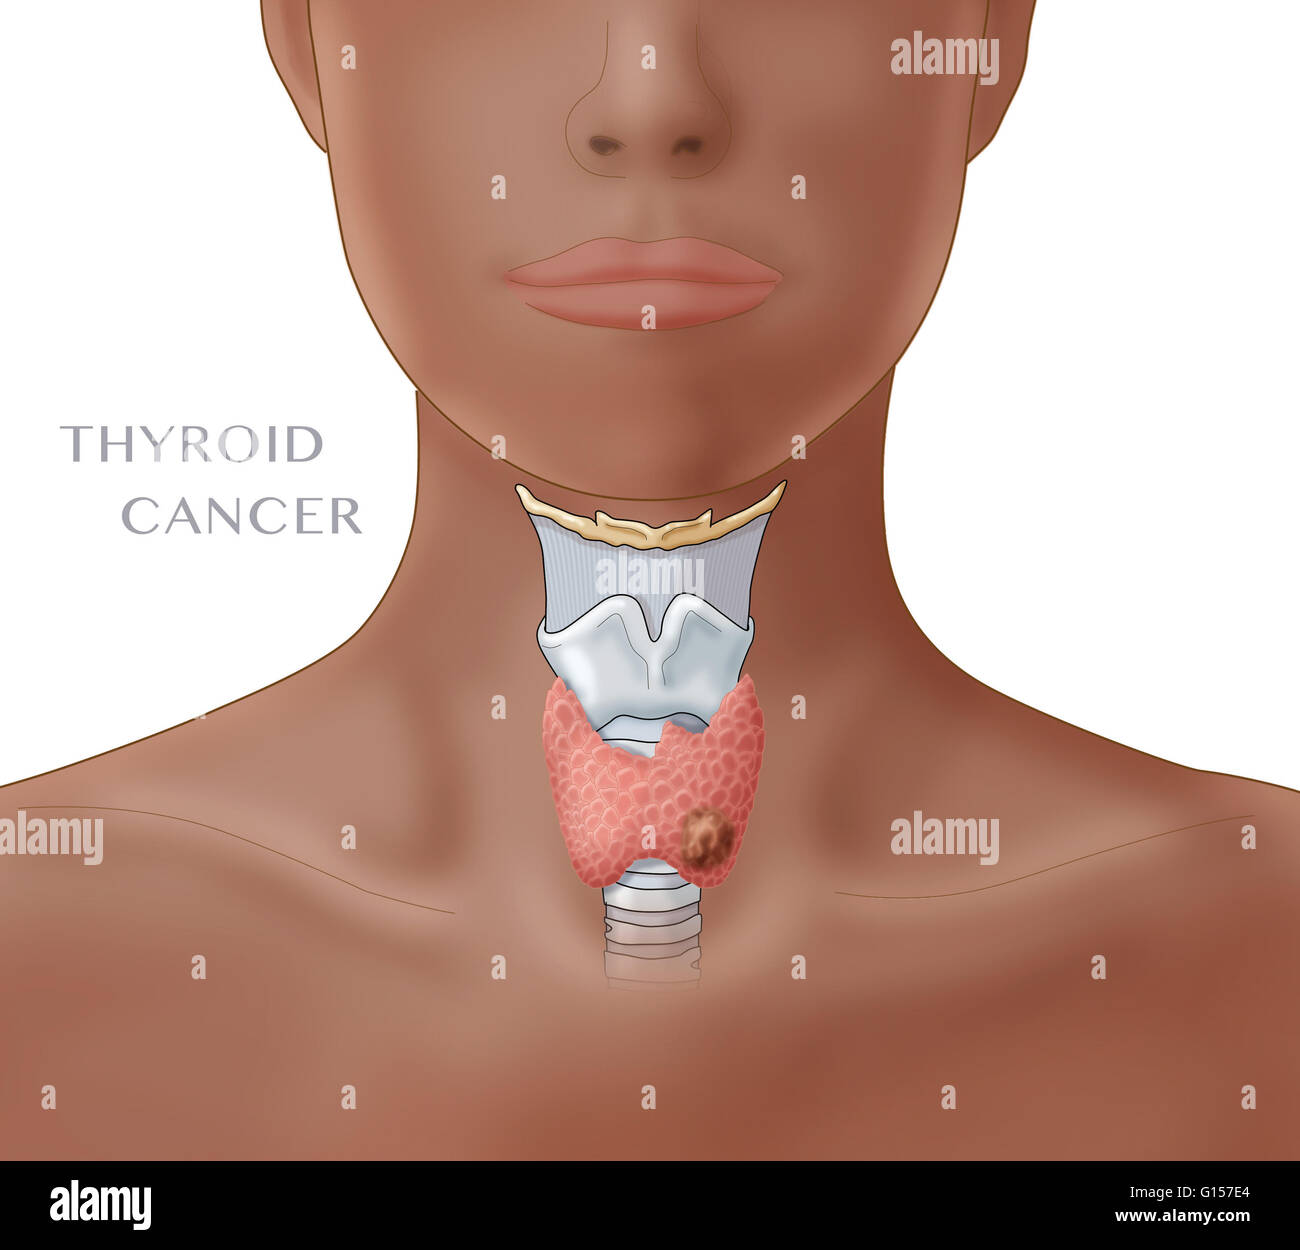 Thyroid cancer. Labeled illustration showing the location of the larynx and thyroid gland in a female figure. A malignant growth can be seen in the lower right area of the thyroid. Stock Photo